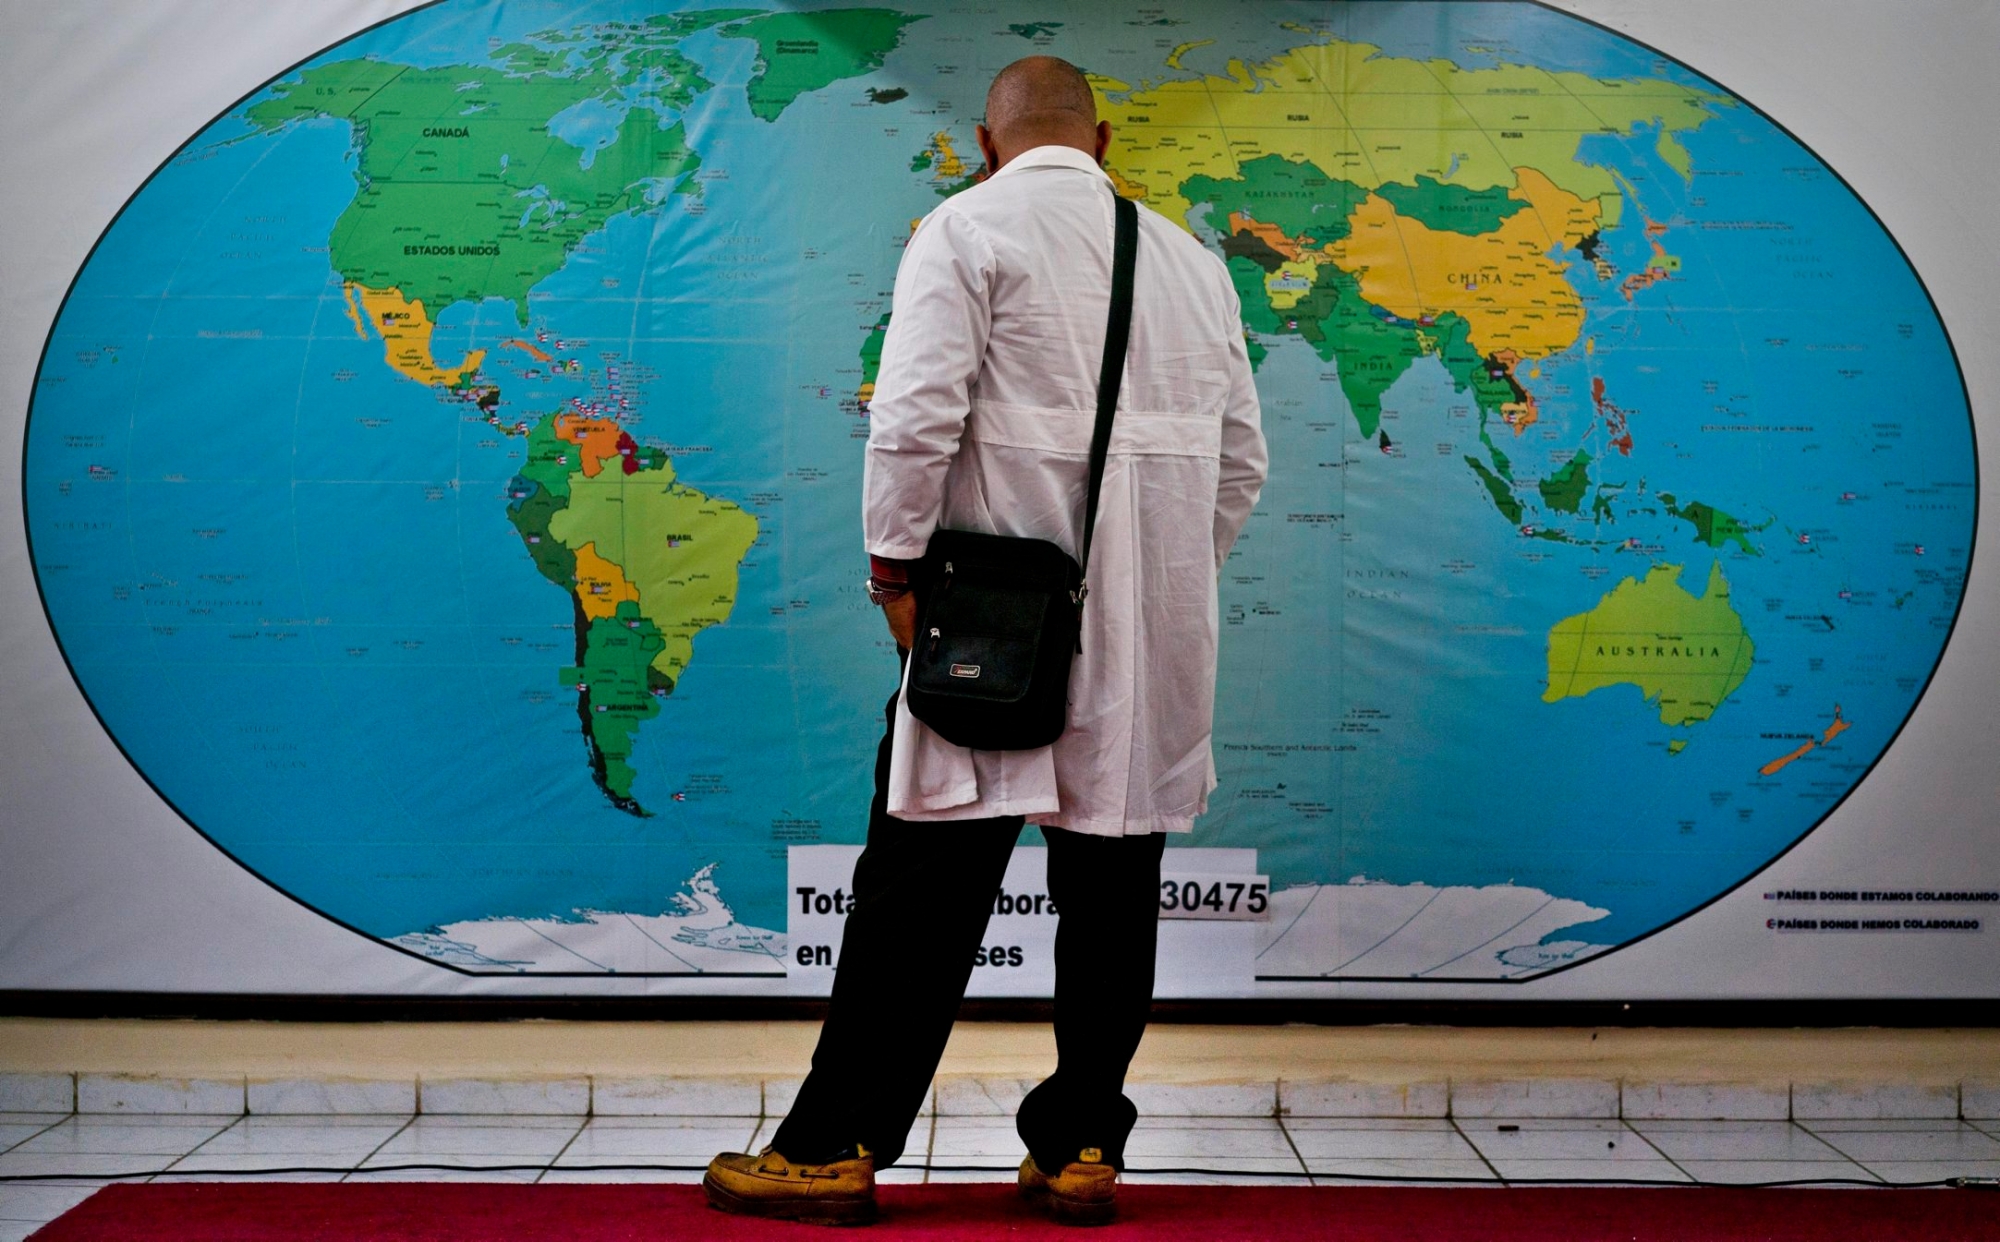 Cuban doctor Ralfis Carbort looks at a map of the world before leaving with the Henry Reeve contingent of Cuban doctors in solidarity with Mozanbique, to help with the devastation caused by Hurricane Idai, in Havana, Cuba, Tuesday, March 26, 2019. (AP Photo/Ramon Espinosa) CUBA MOZANBIQUE DOCTORS